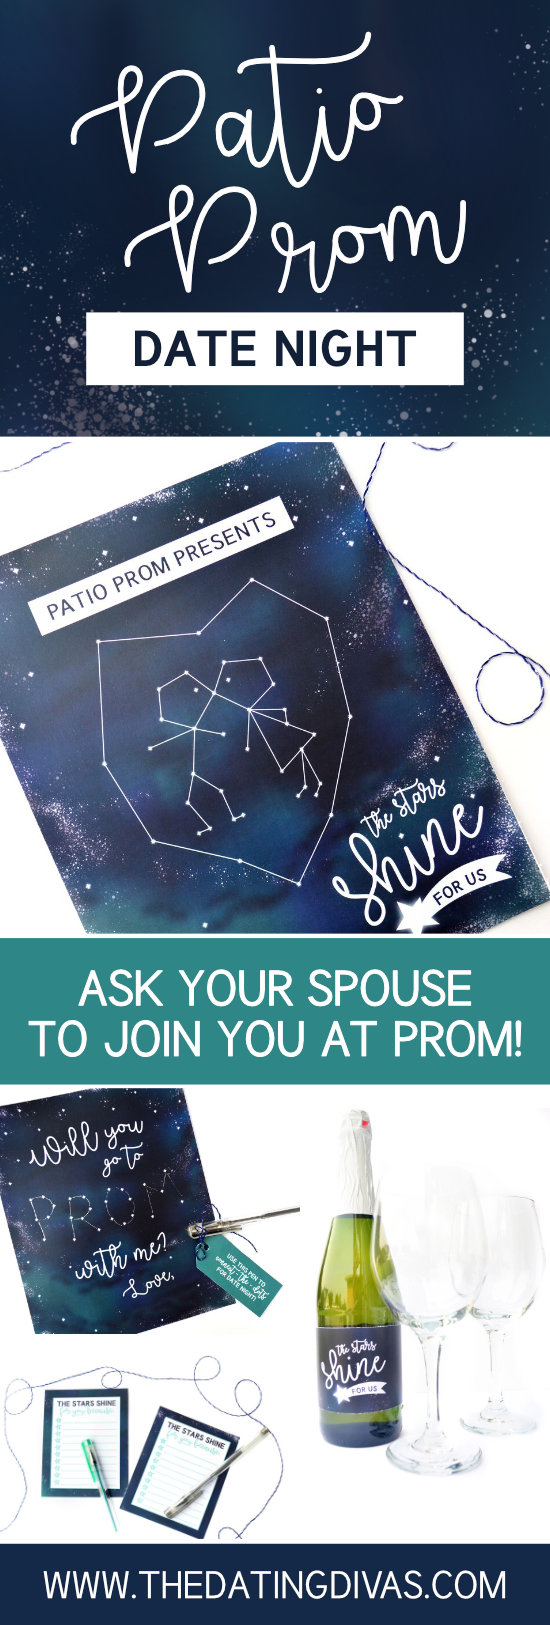 Ask your spouse on a Patio Prom Date.